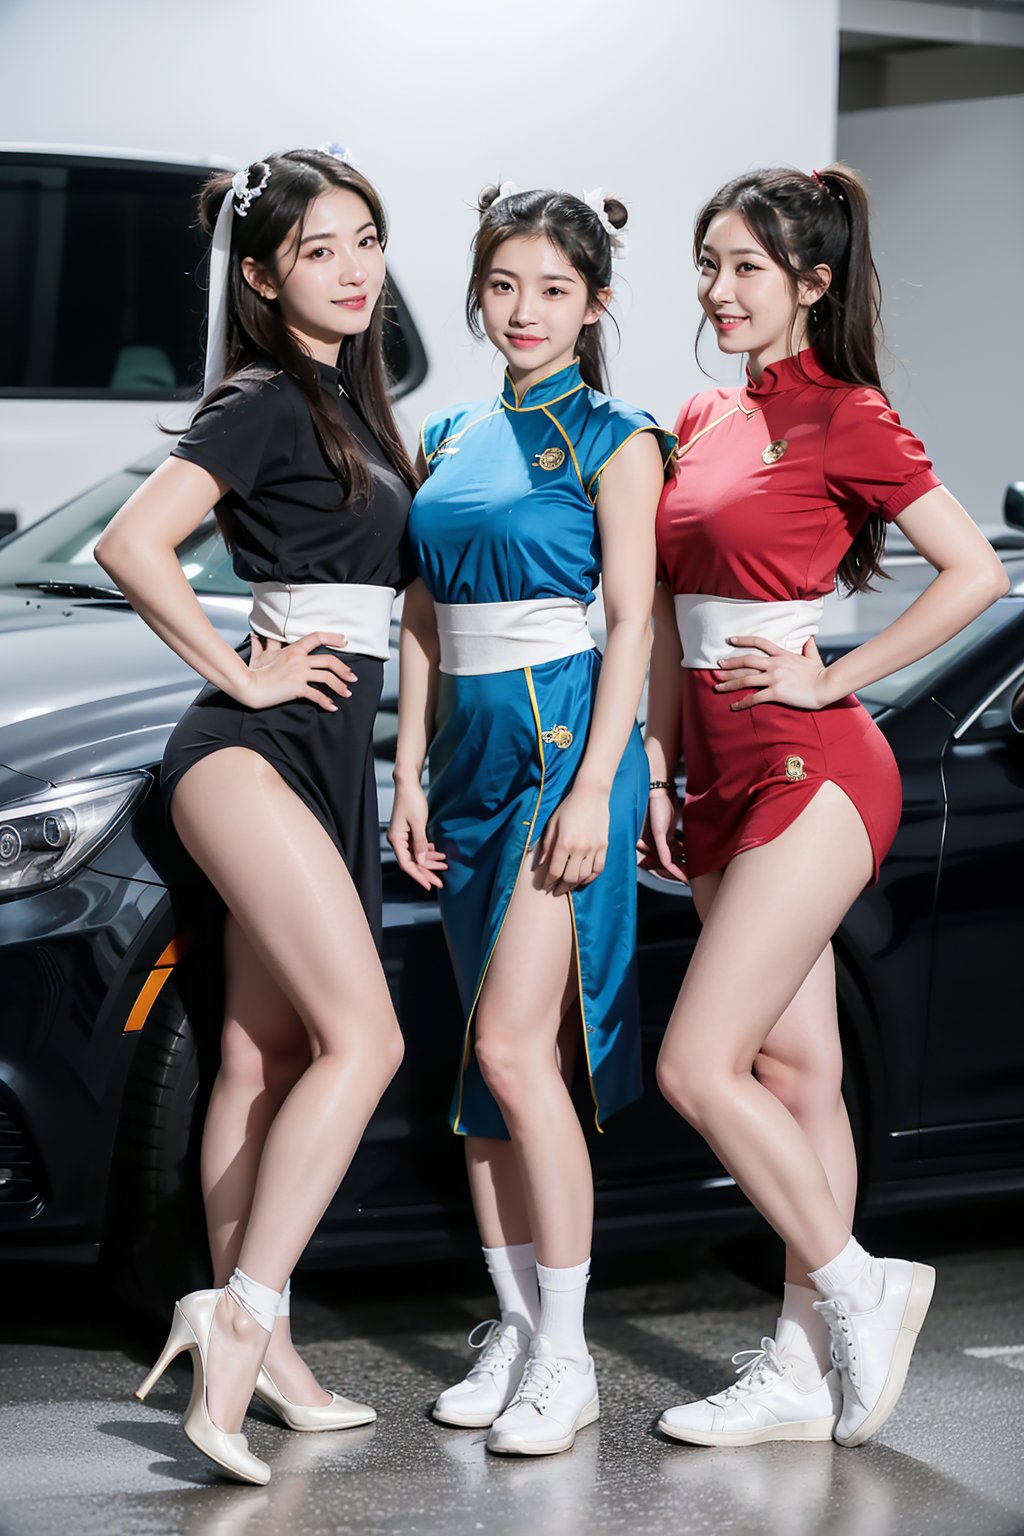 centered,eye contact,Detailedface, (group photo, 3 girls:1.3), standing, posing, hands on waist, photography, in a car garage, sport car background,beautiful woman, female korean, cosplay, chun-li costume, full body, smooth hands, big smiles, black pantyhose, white shoes, Extremely Realistic, chun li